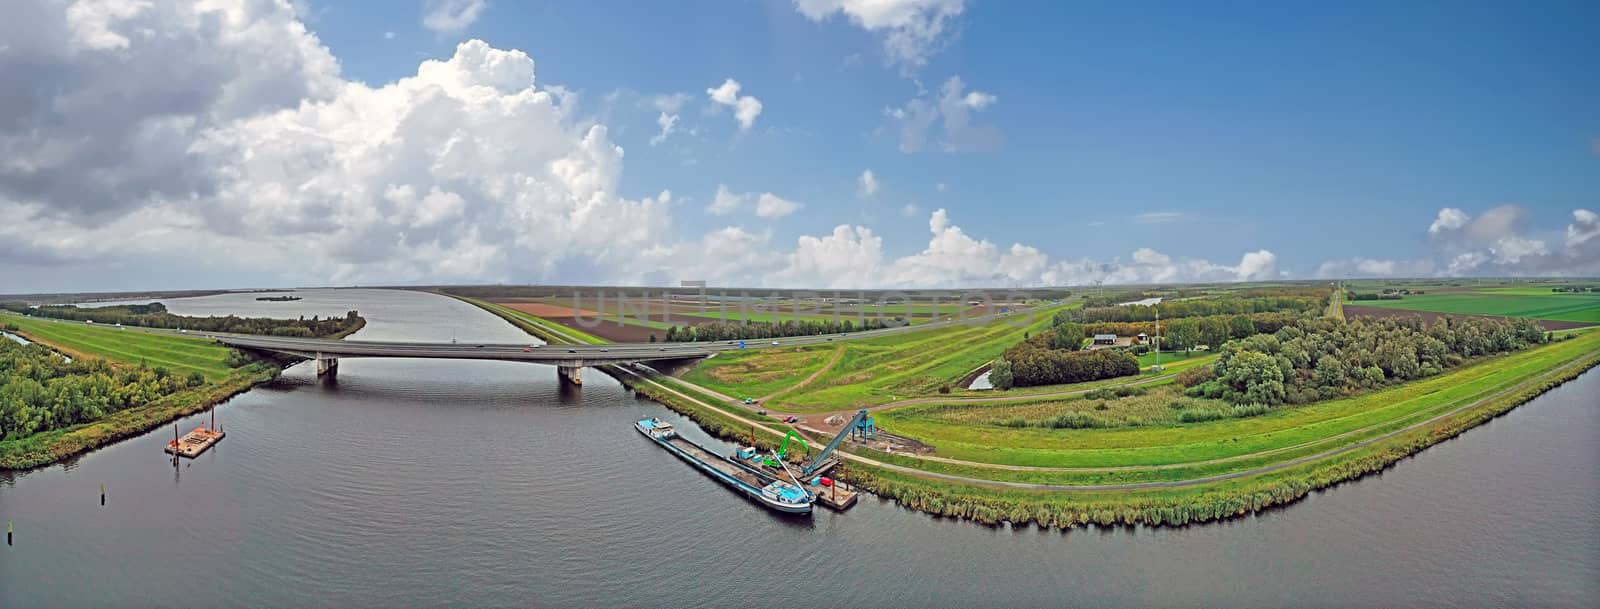 Typical dutch panoramic scenery: Highway A1 and a freighter unlo by devy